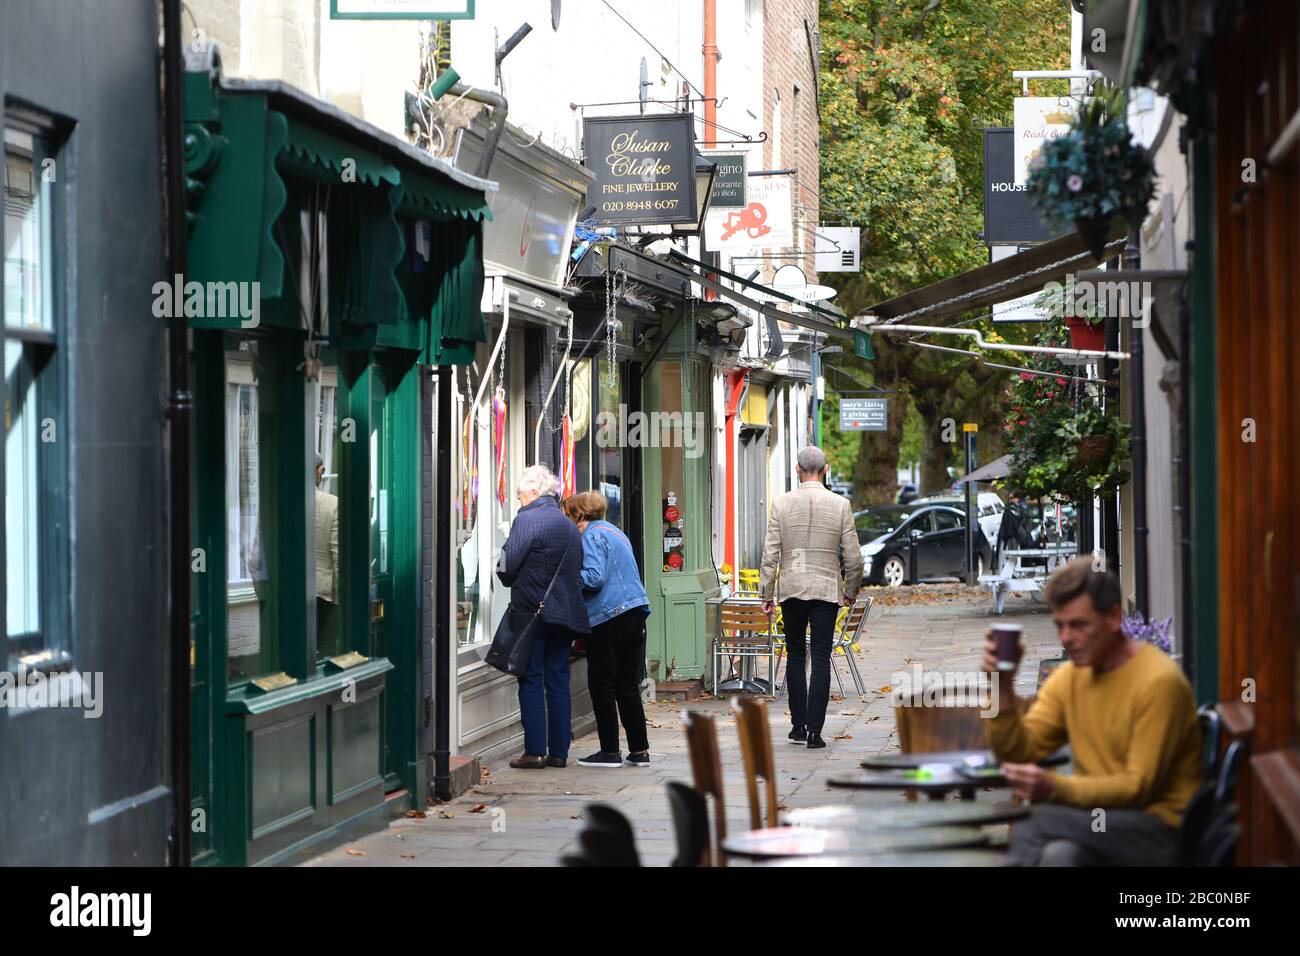 Shops and bars in Paved Court, Richmond, London, UK Stock Photo